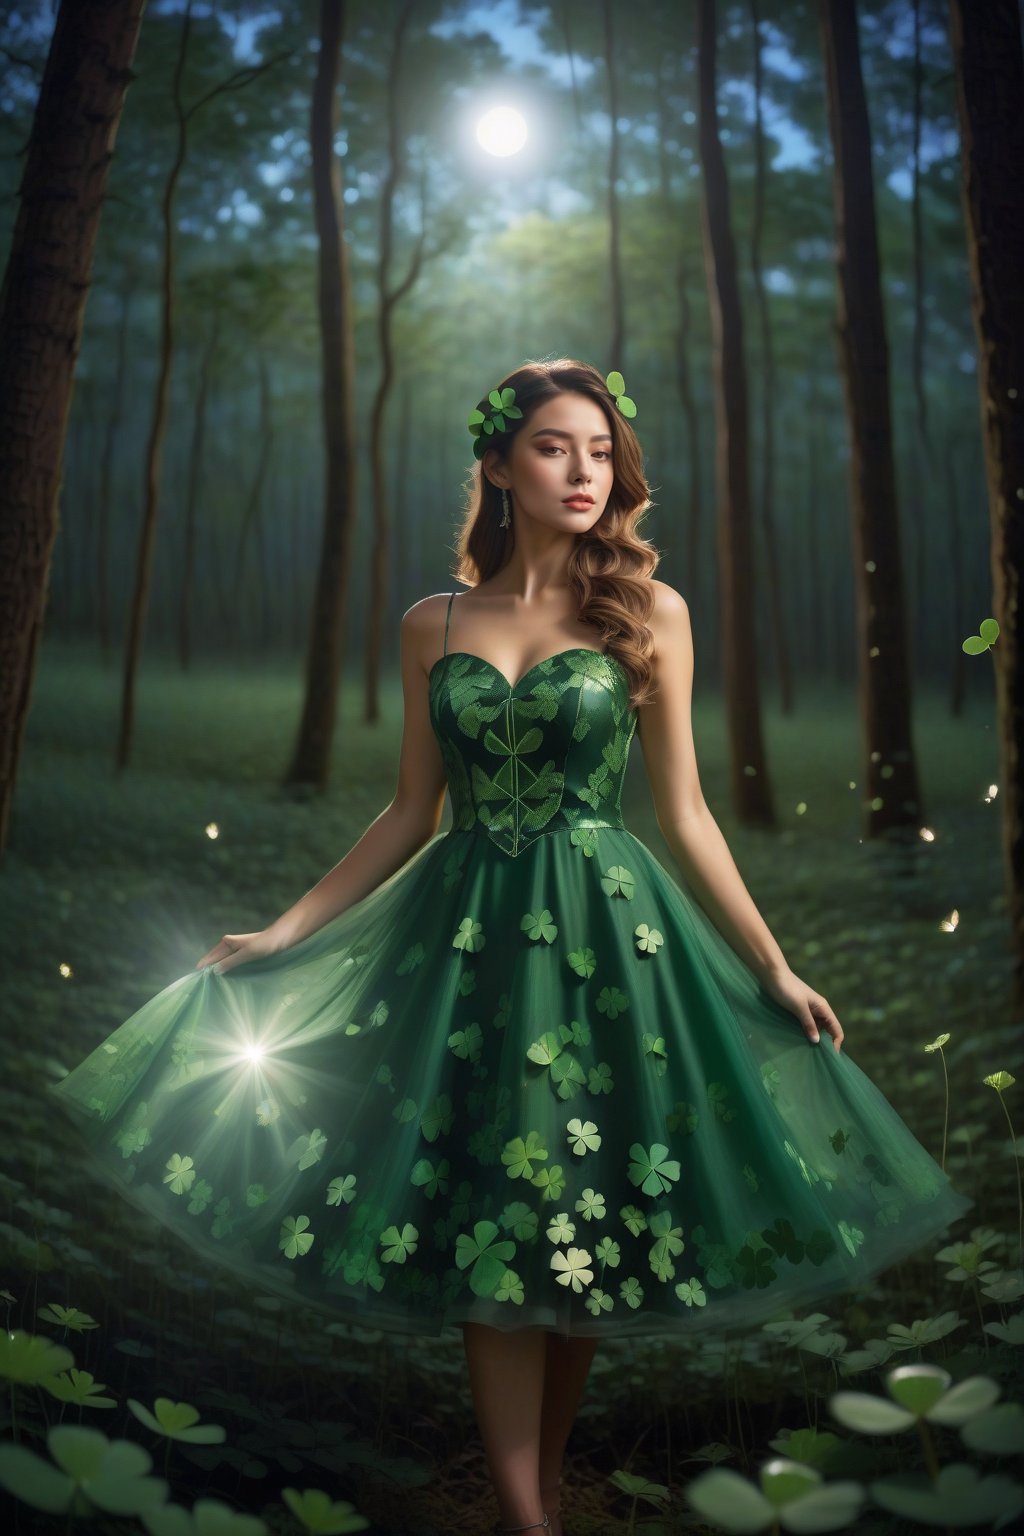 A beautiful girl wearing a four-leaf clover dress, standing in a beautiful forest, with the bright moonlight shining on the earth under the night sky